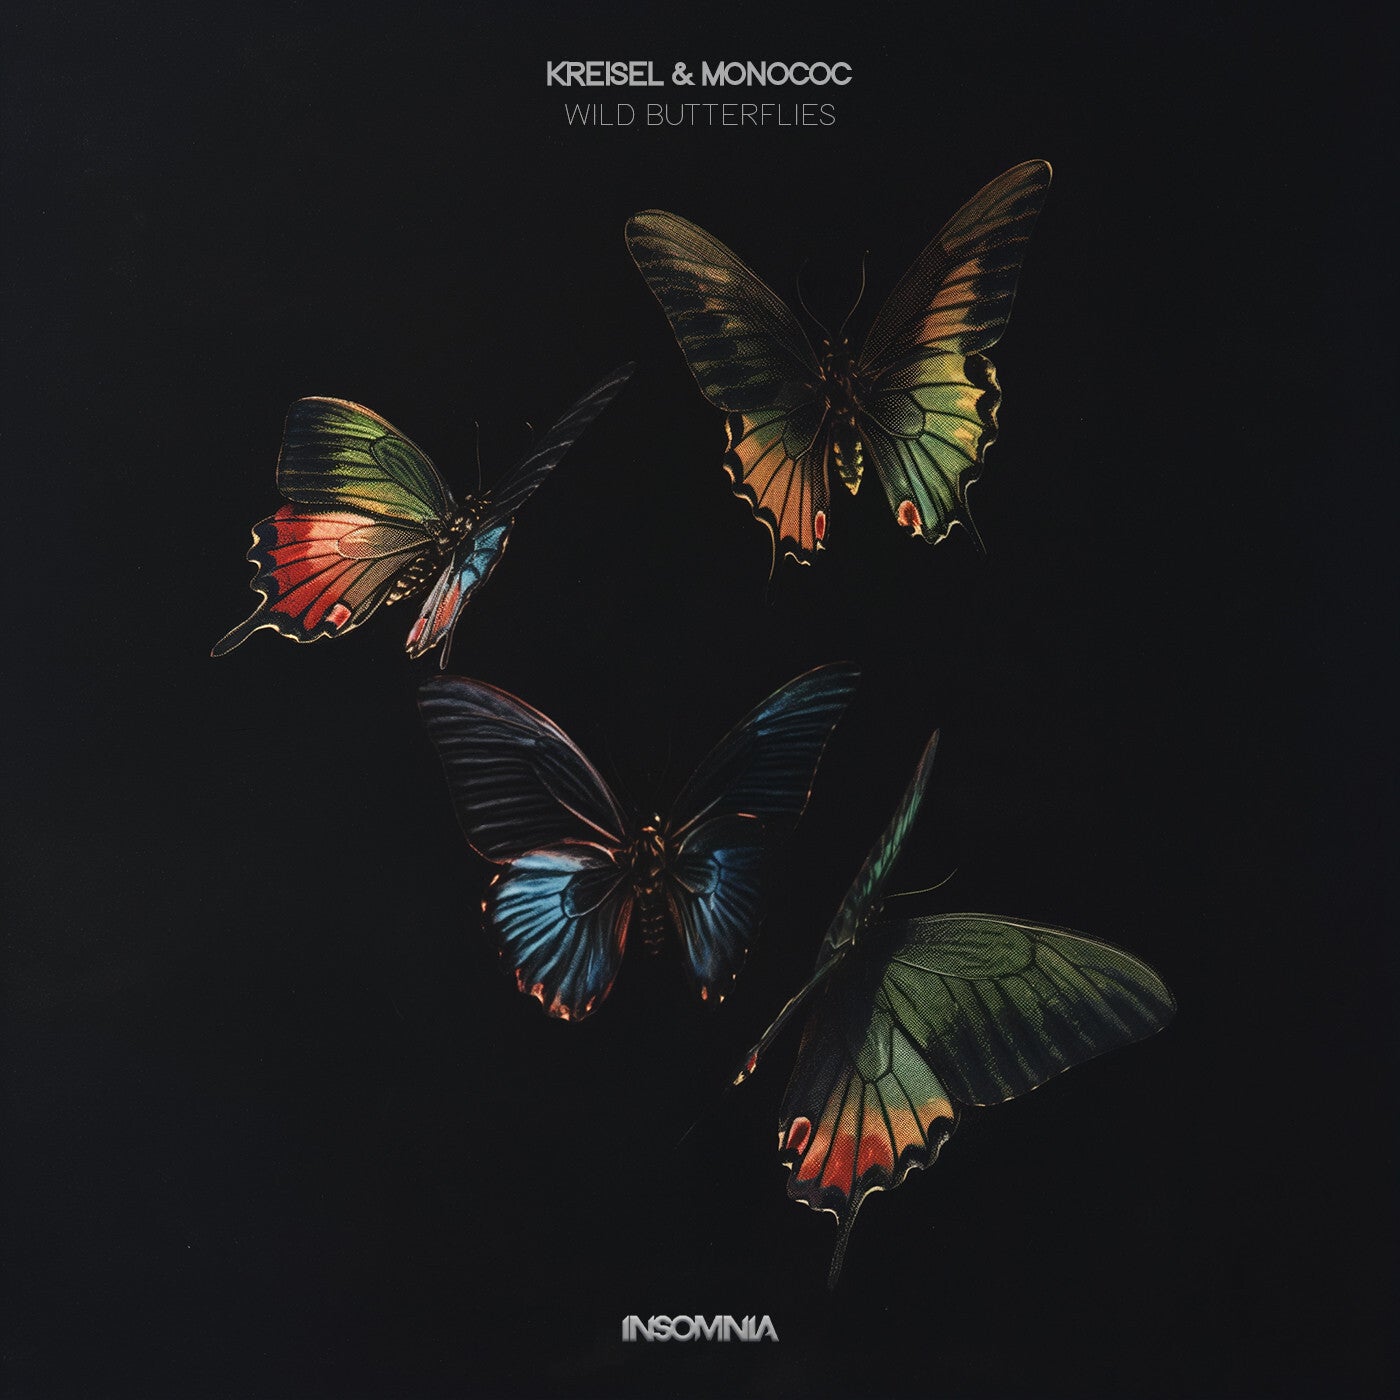 image cover: Kreisel, Monococ - Wild Butterflies on INSOMNIA